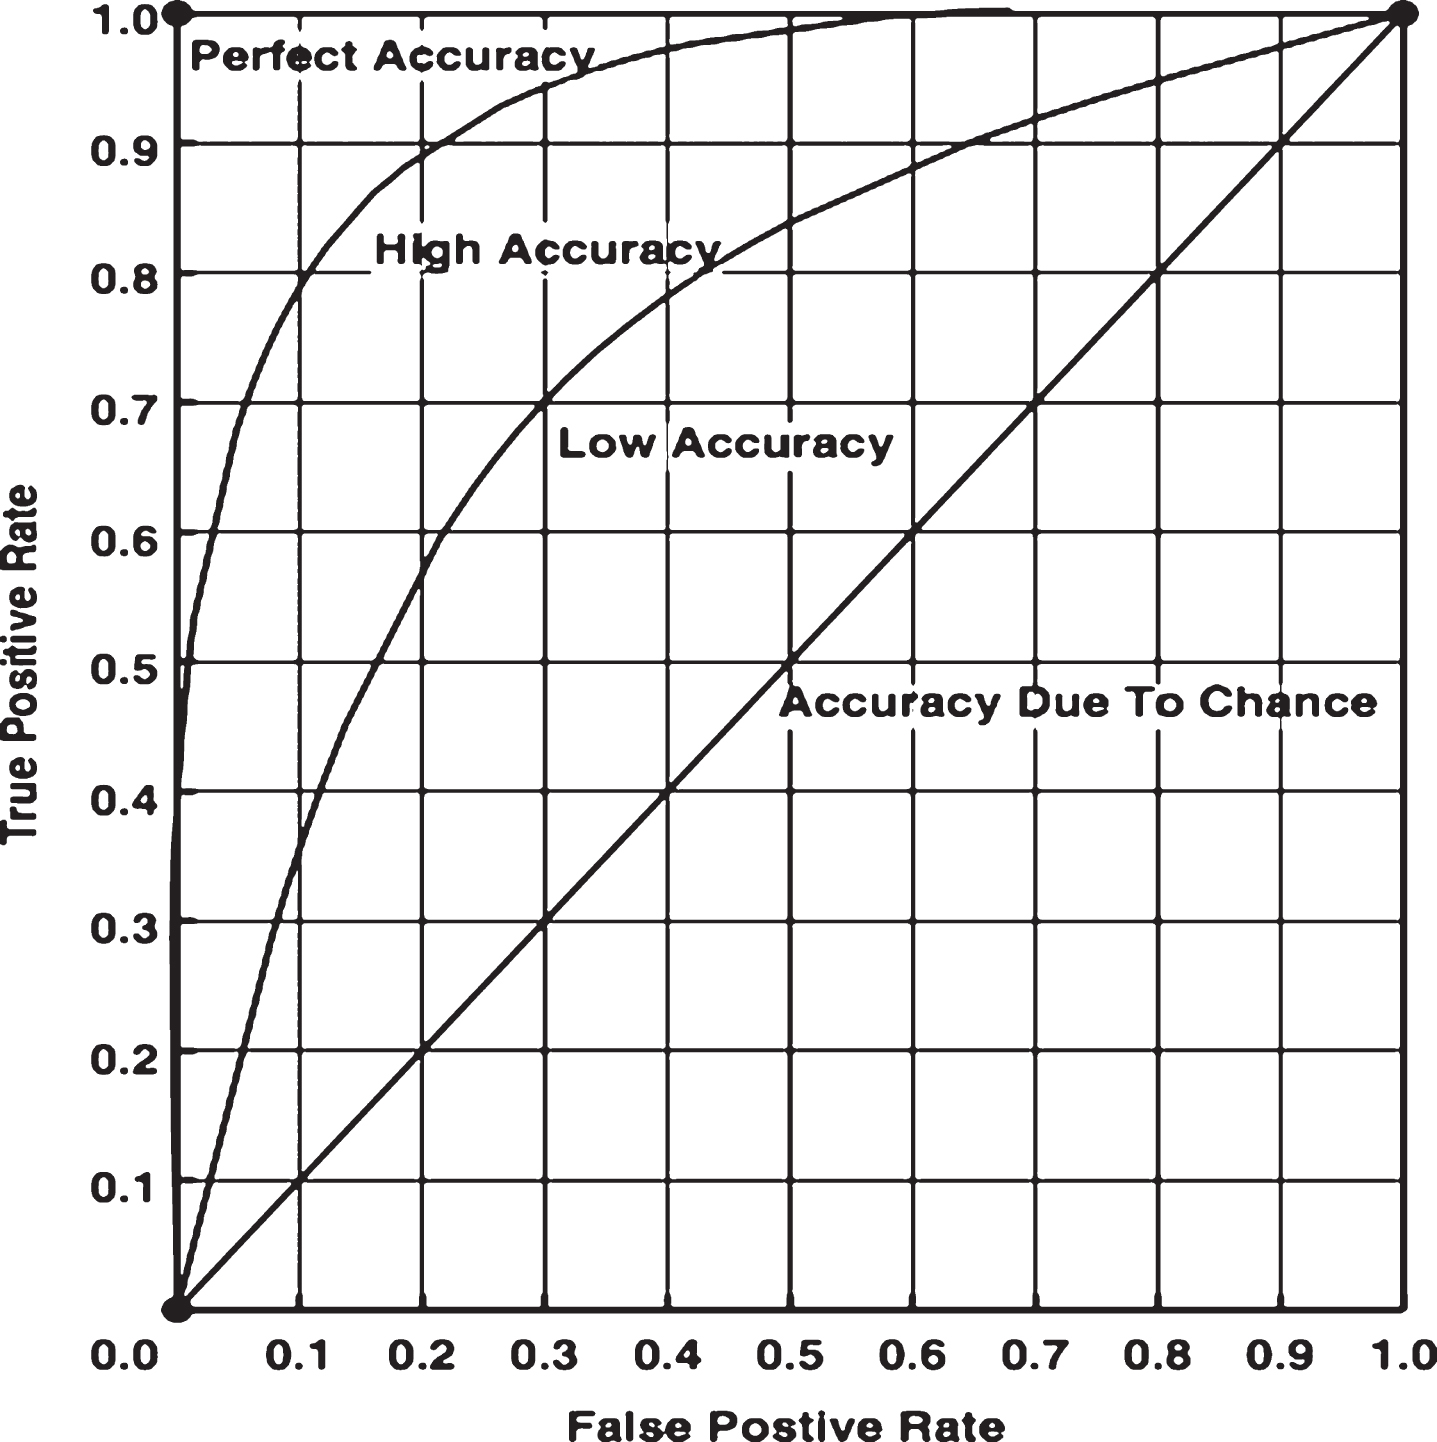 Comparison of ROC curves with different degrees of accuracy.